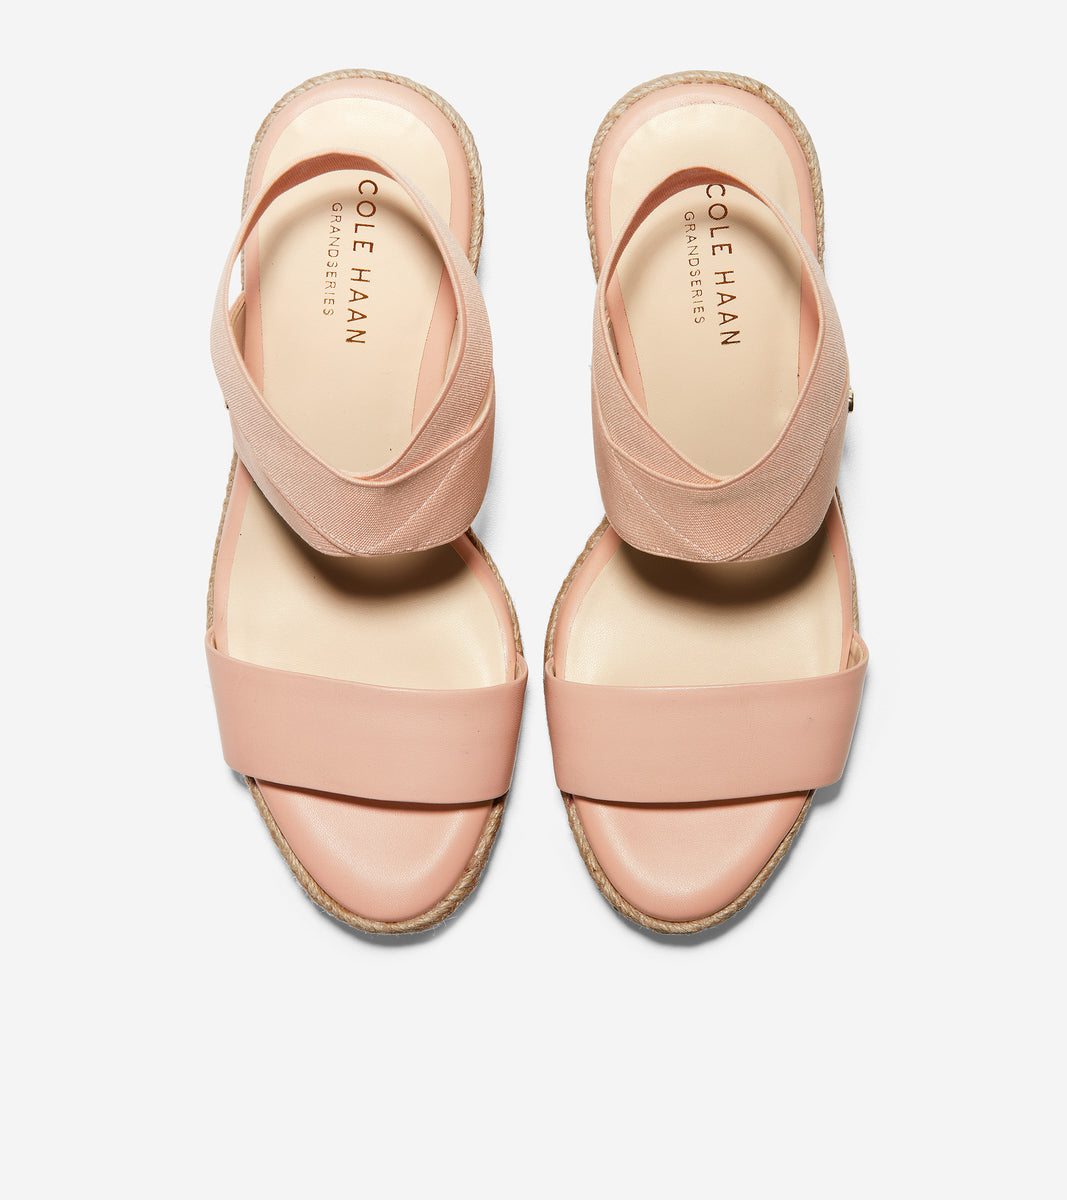 ColeHaan-Cloudfeel Espadrille Wedge Sandal-w17639-Mahogany Rose Leather